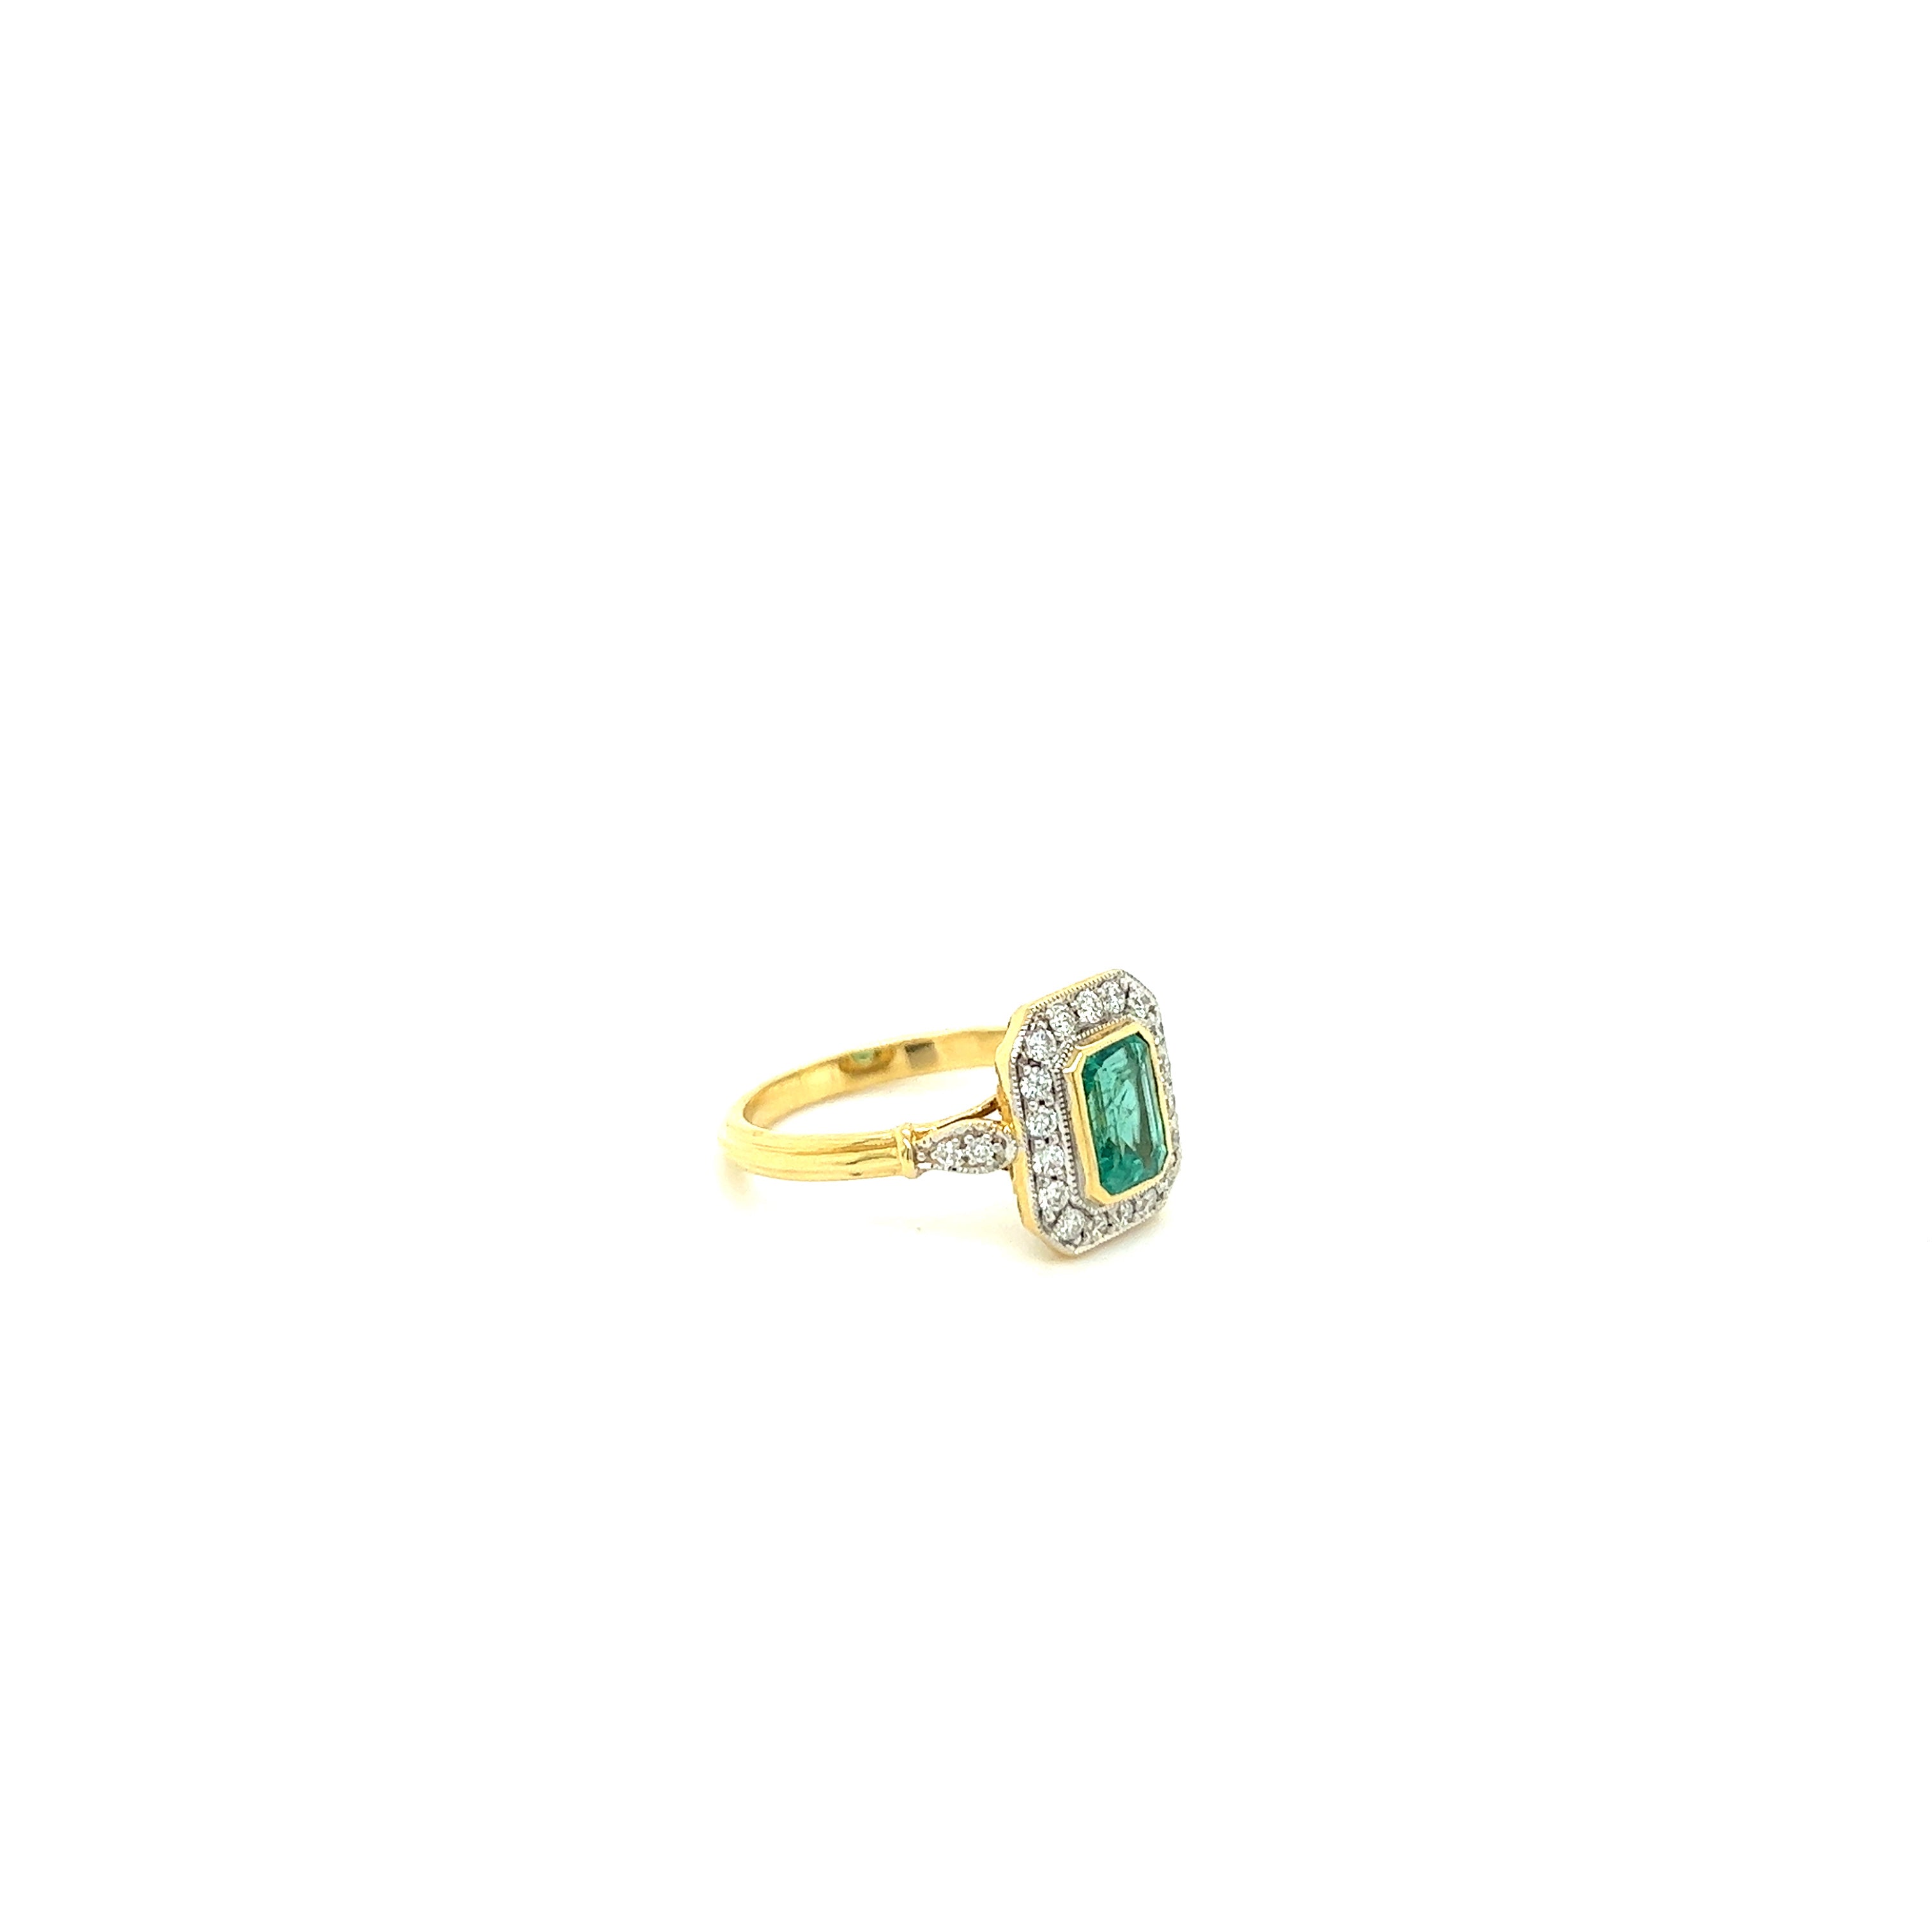 18ct yellow gold emerald and diamond ring.